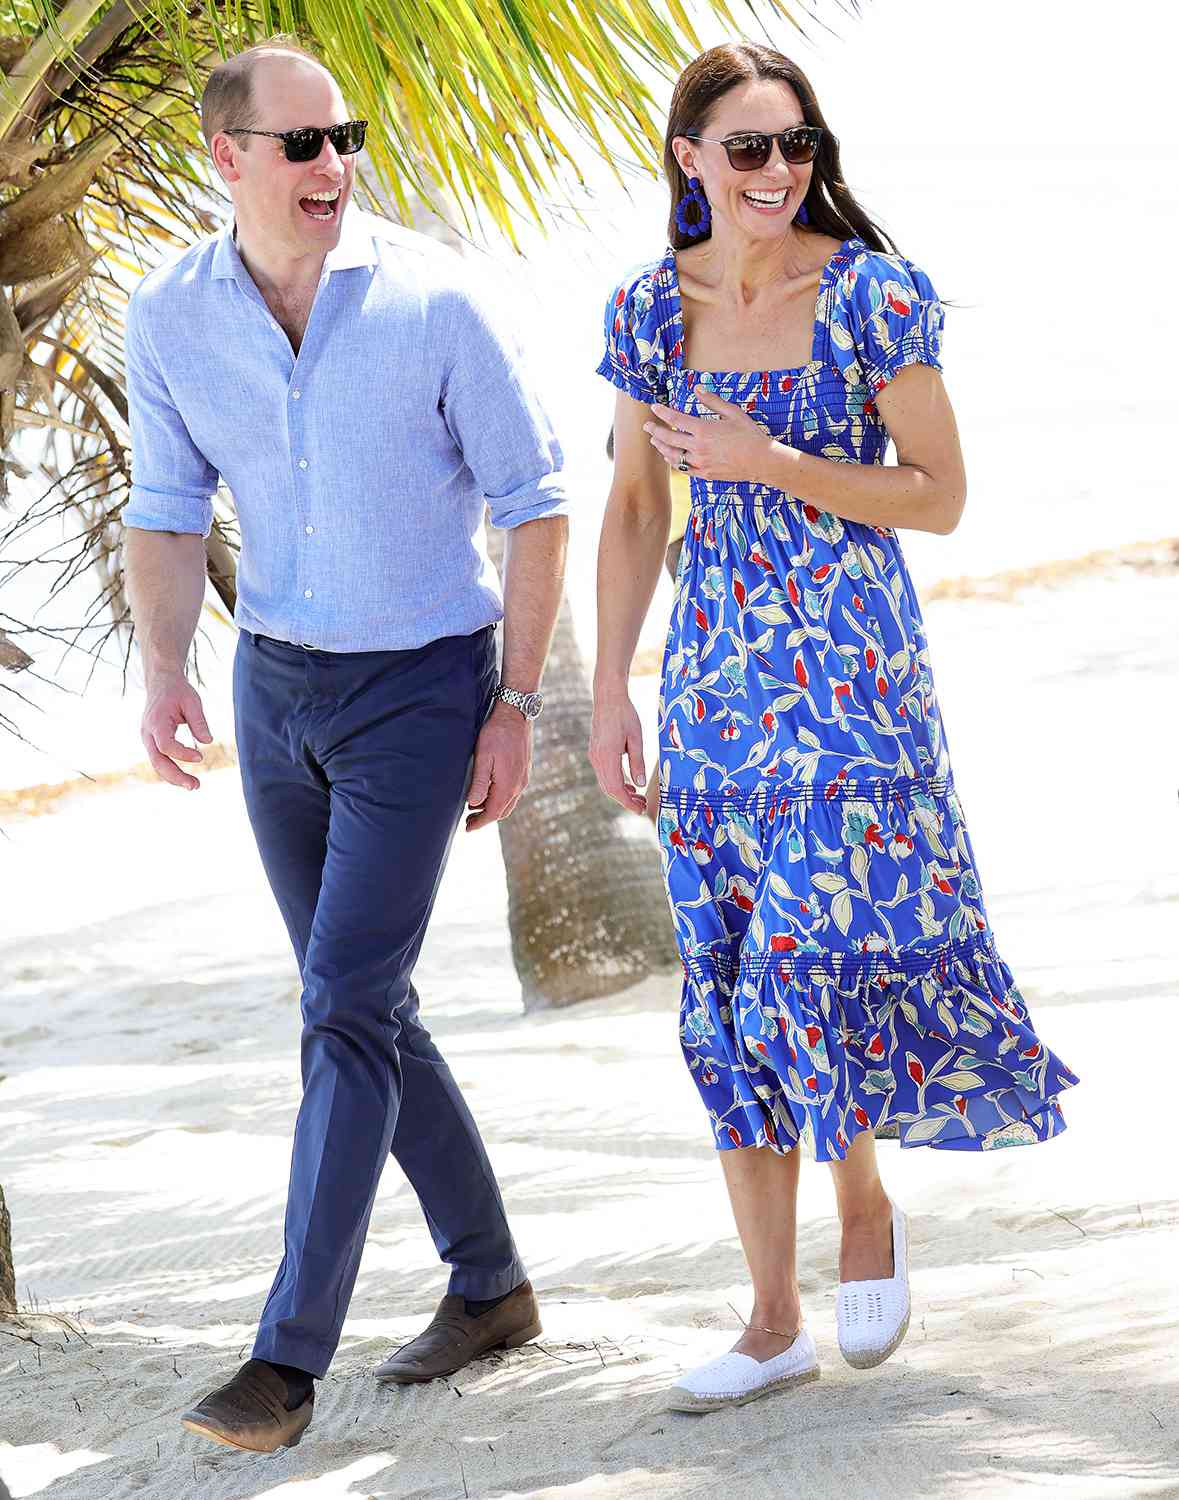 Catherine, Duchess of Cambridge and Prince William, Duke of Cambridge on the Beach after a Garifuna Festival on the second day of a Platinum Jubilee Royal Tour of the Caribbean on March 20, 2022 in Hopkins, Belize. The Duke and Duchess of Cambridge are visiting Belize, Jamaica and The Bahamas on their week long tour.